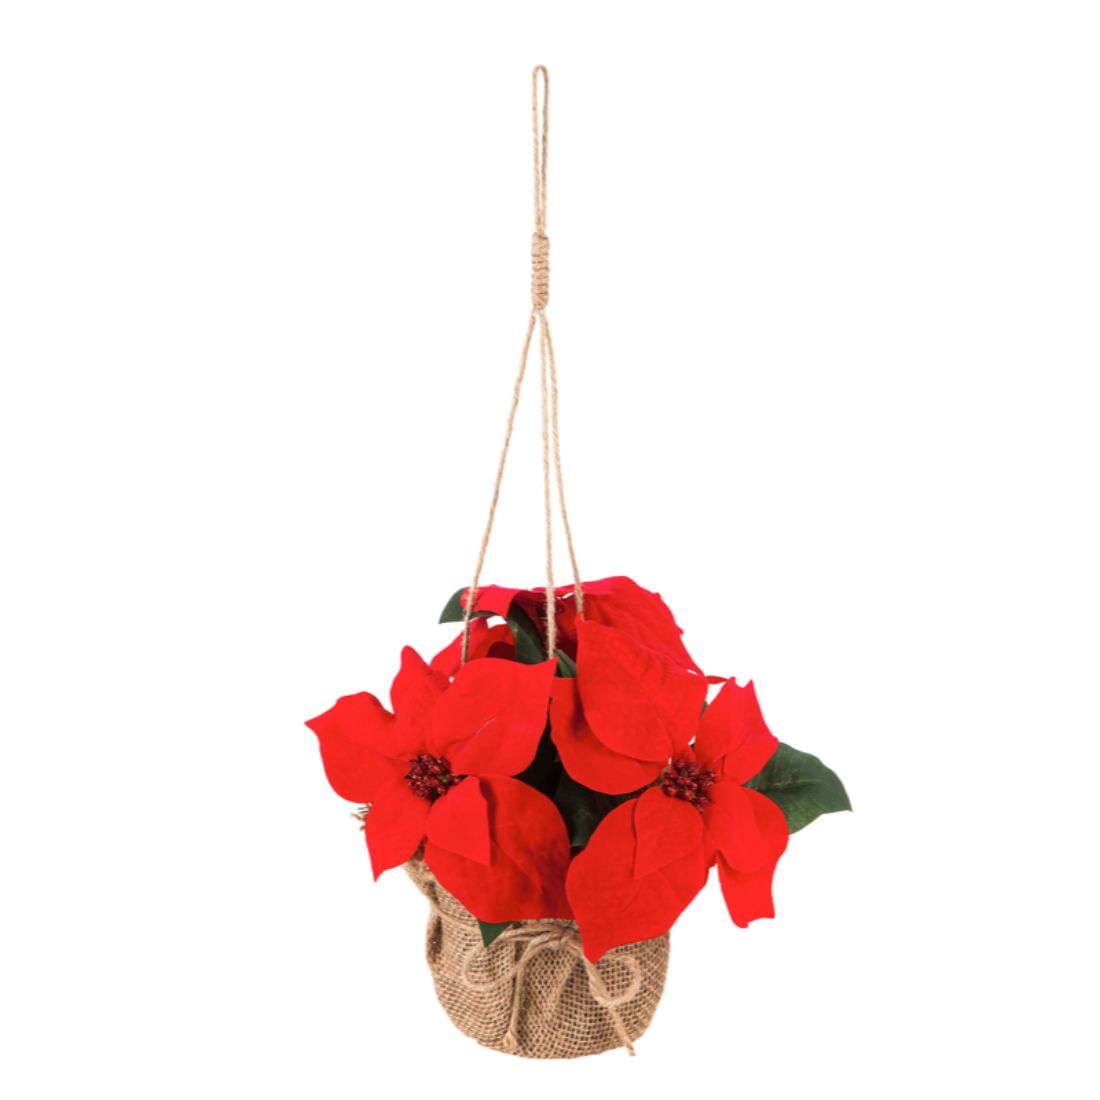 Hanging Poinsettia with Burlap Wrapped pot and Rope Hanger